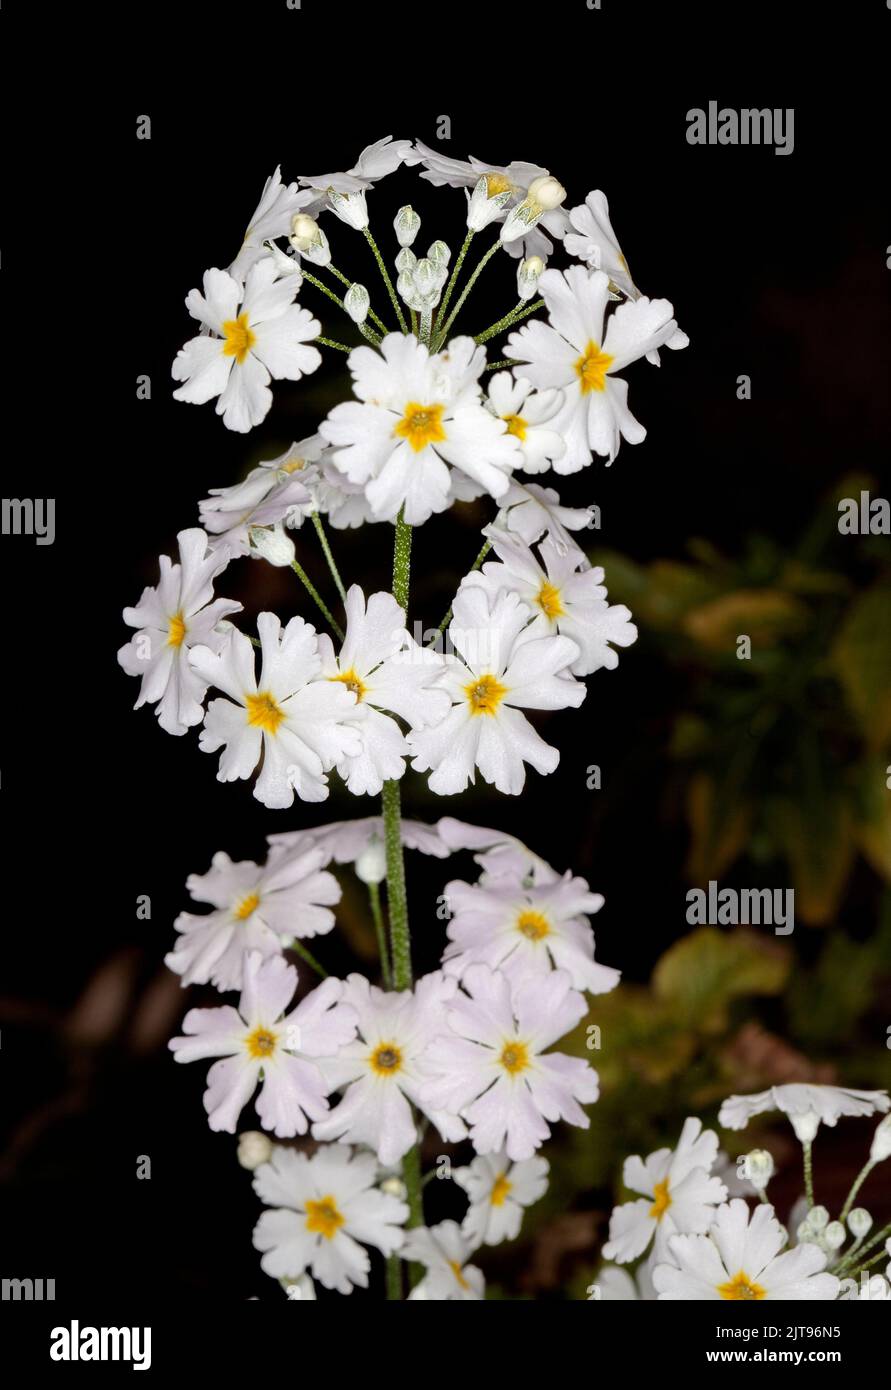 Cluster of vivid white perfumed flowers of annual Primula malacoides against dark background in Australia Stock Photo